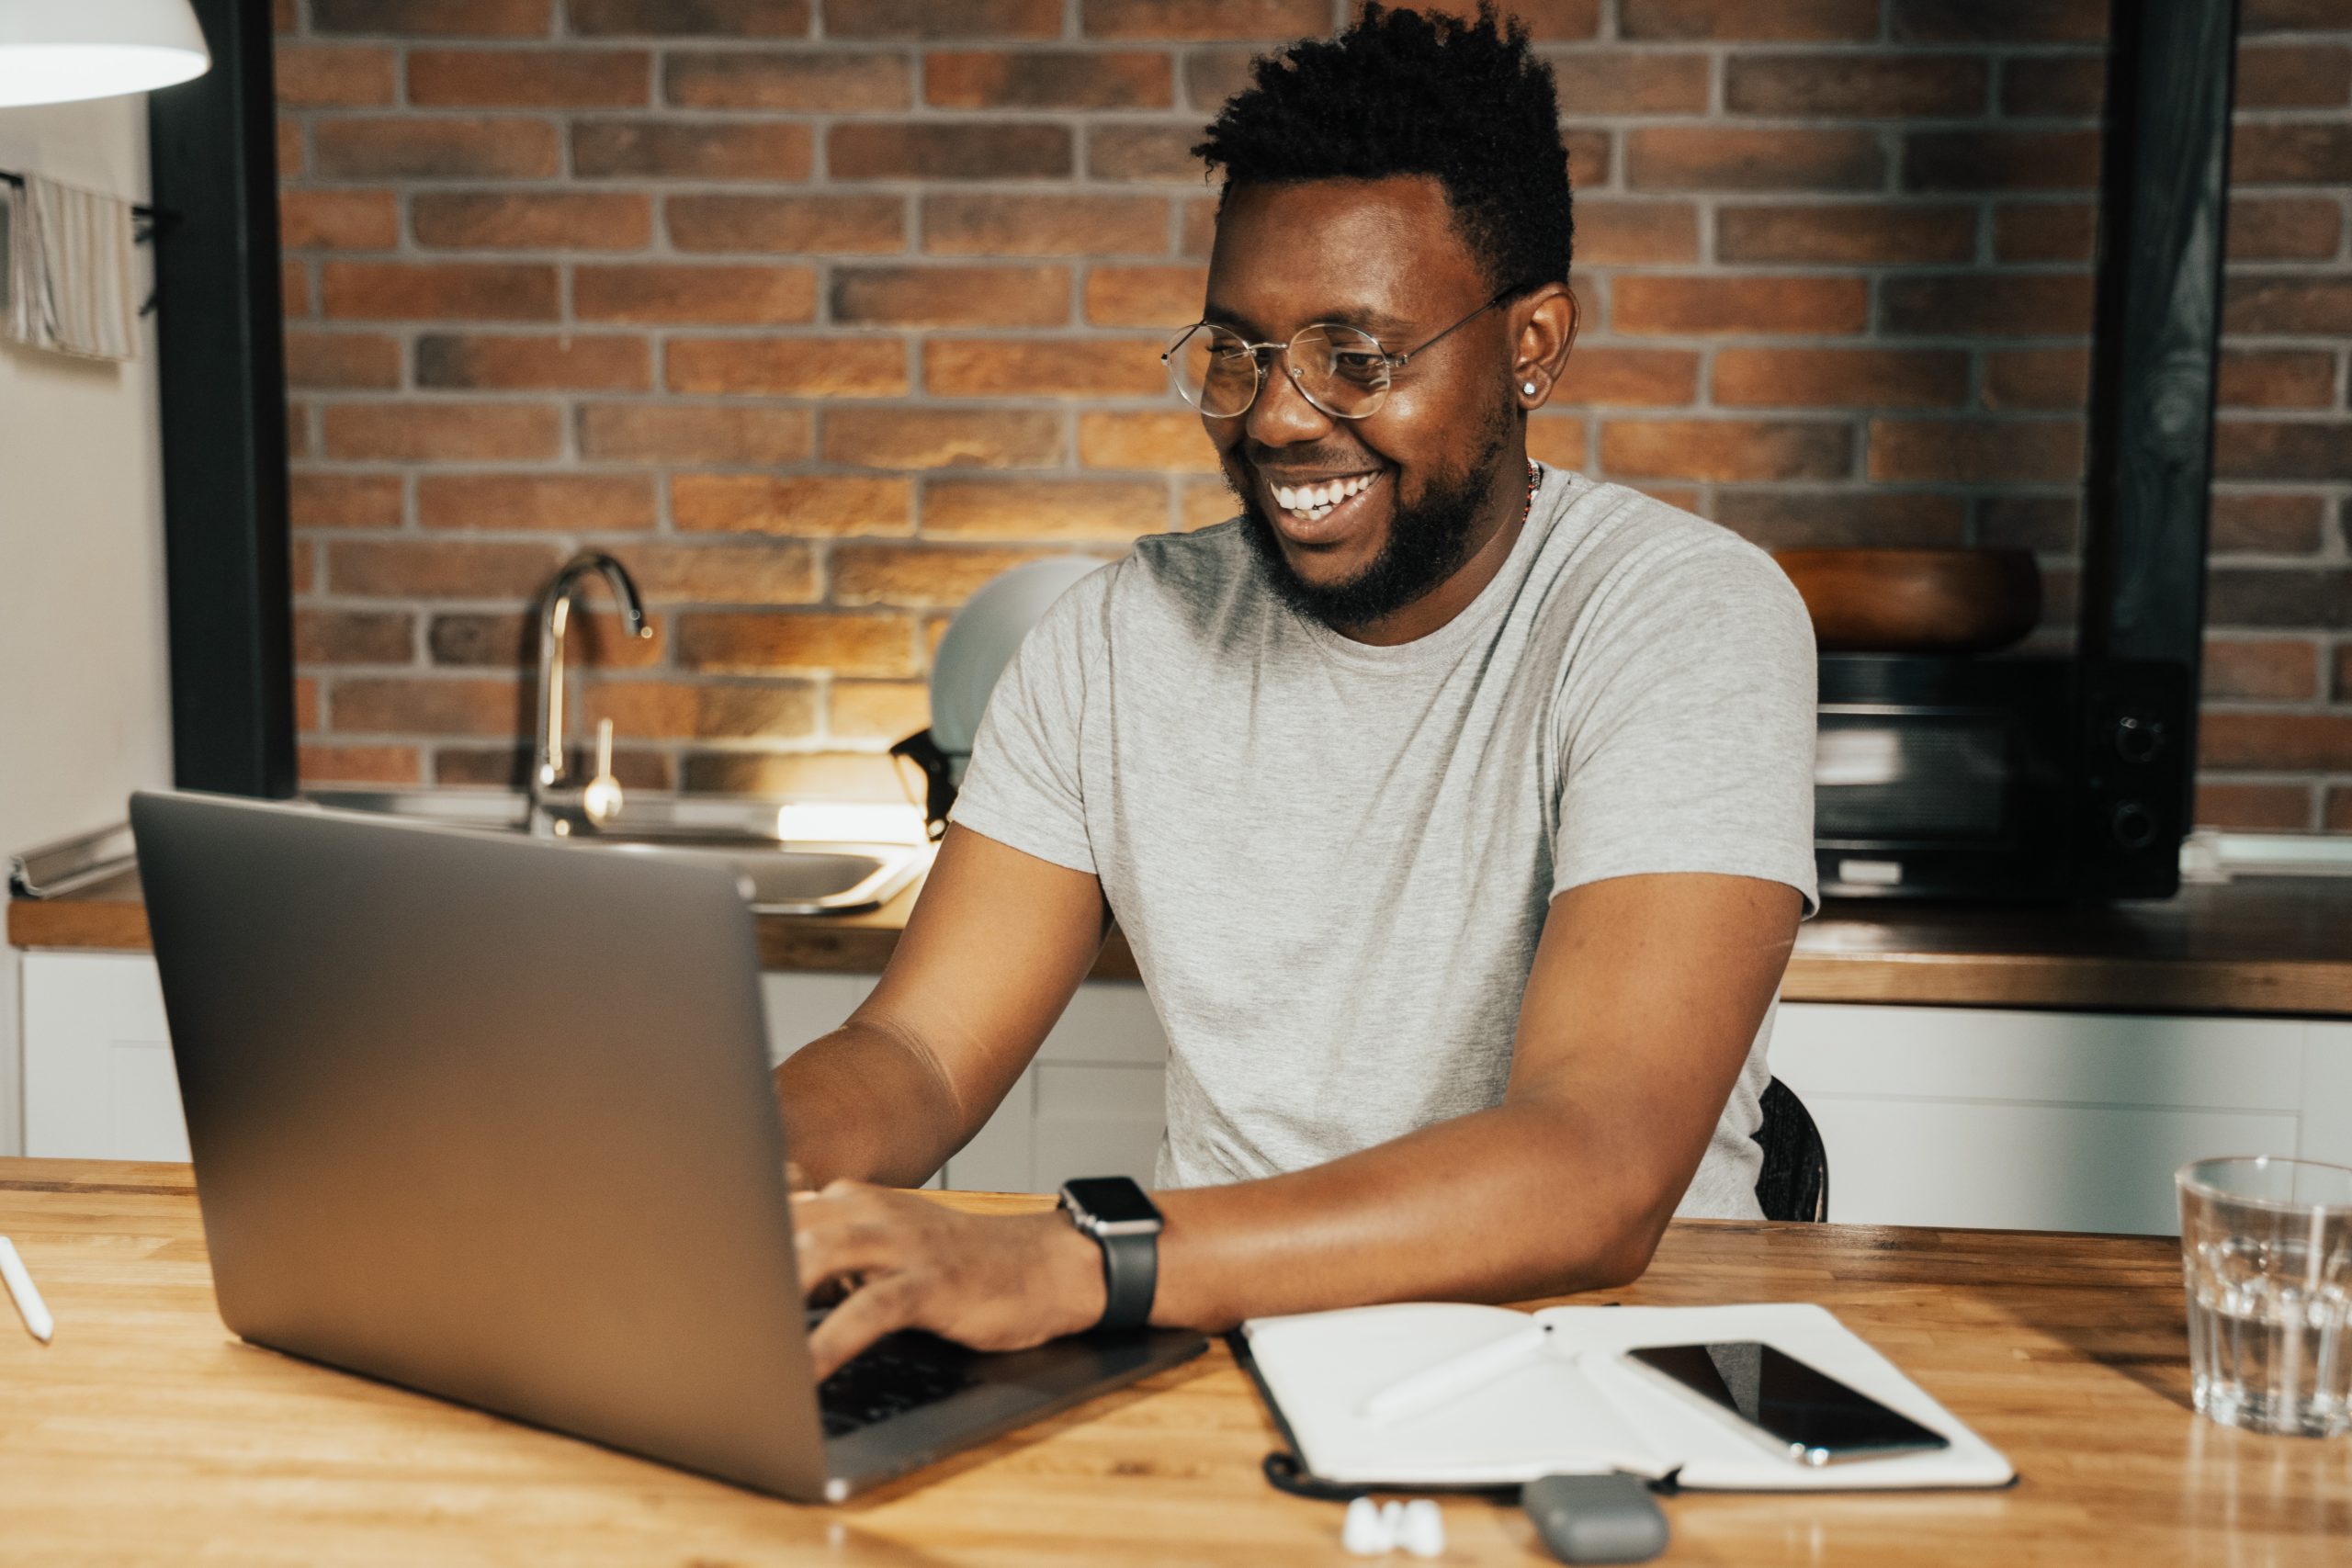 Man smiling, using a computer